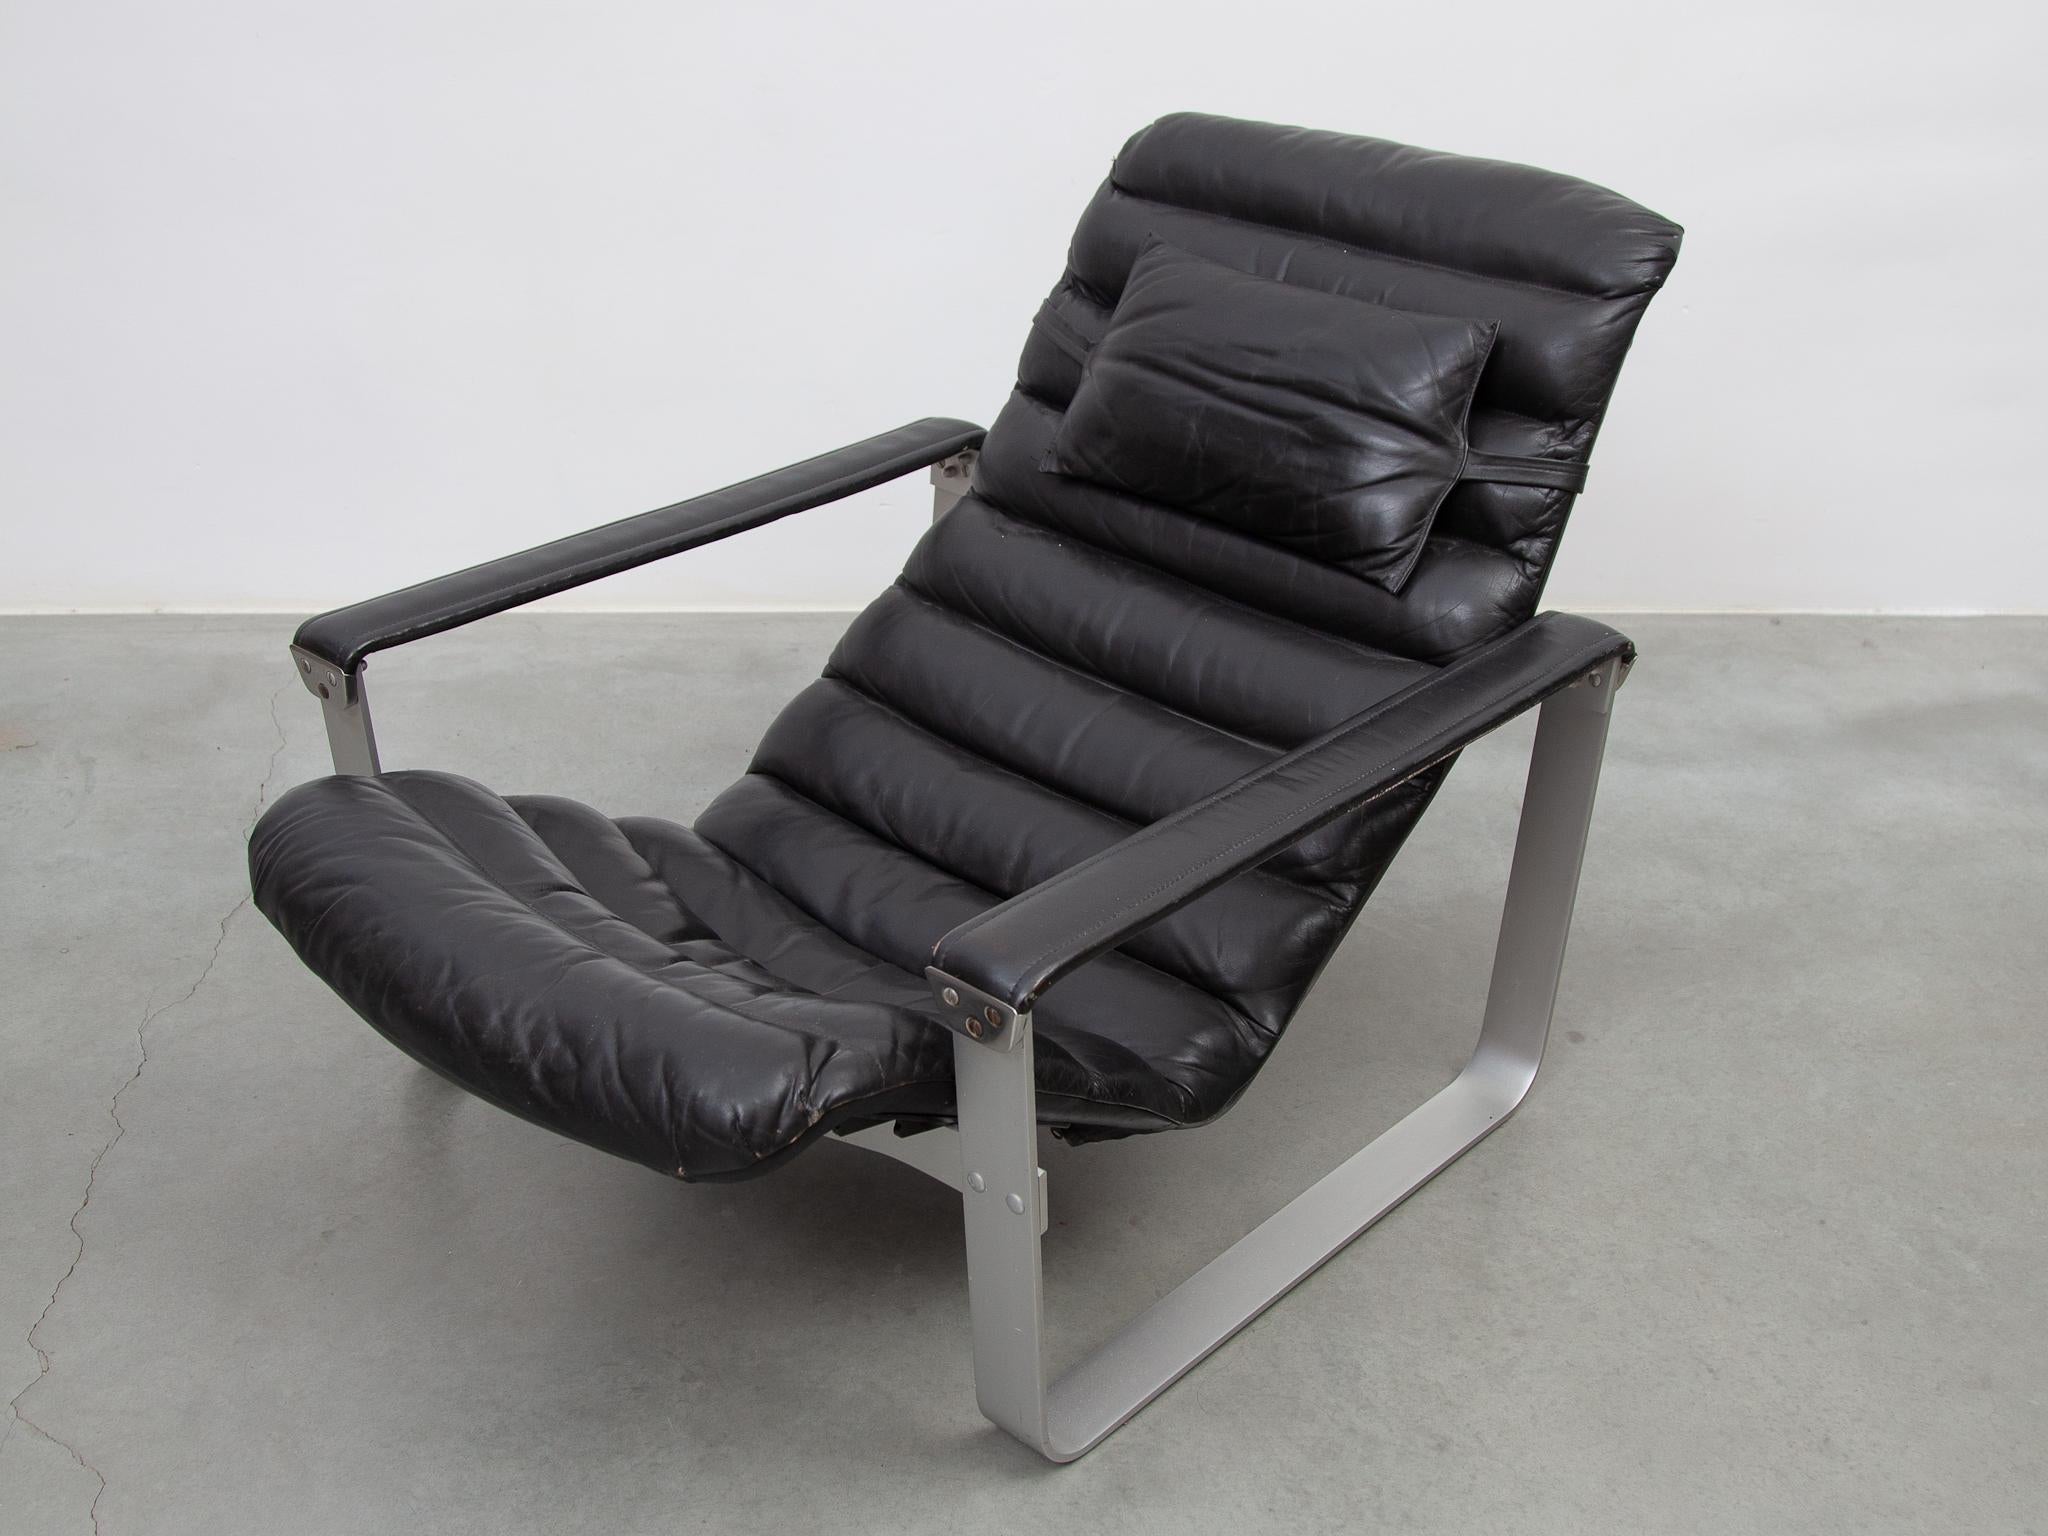 Pulkka Lounge Chair designed by Ilmari Lappalainen by ASKO, Finland, 1968 For Sale 4